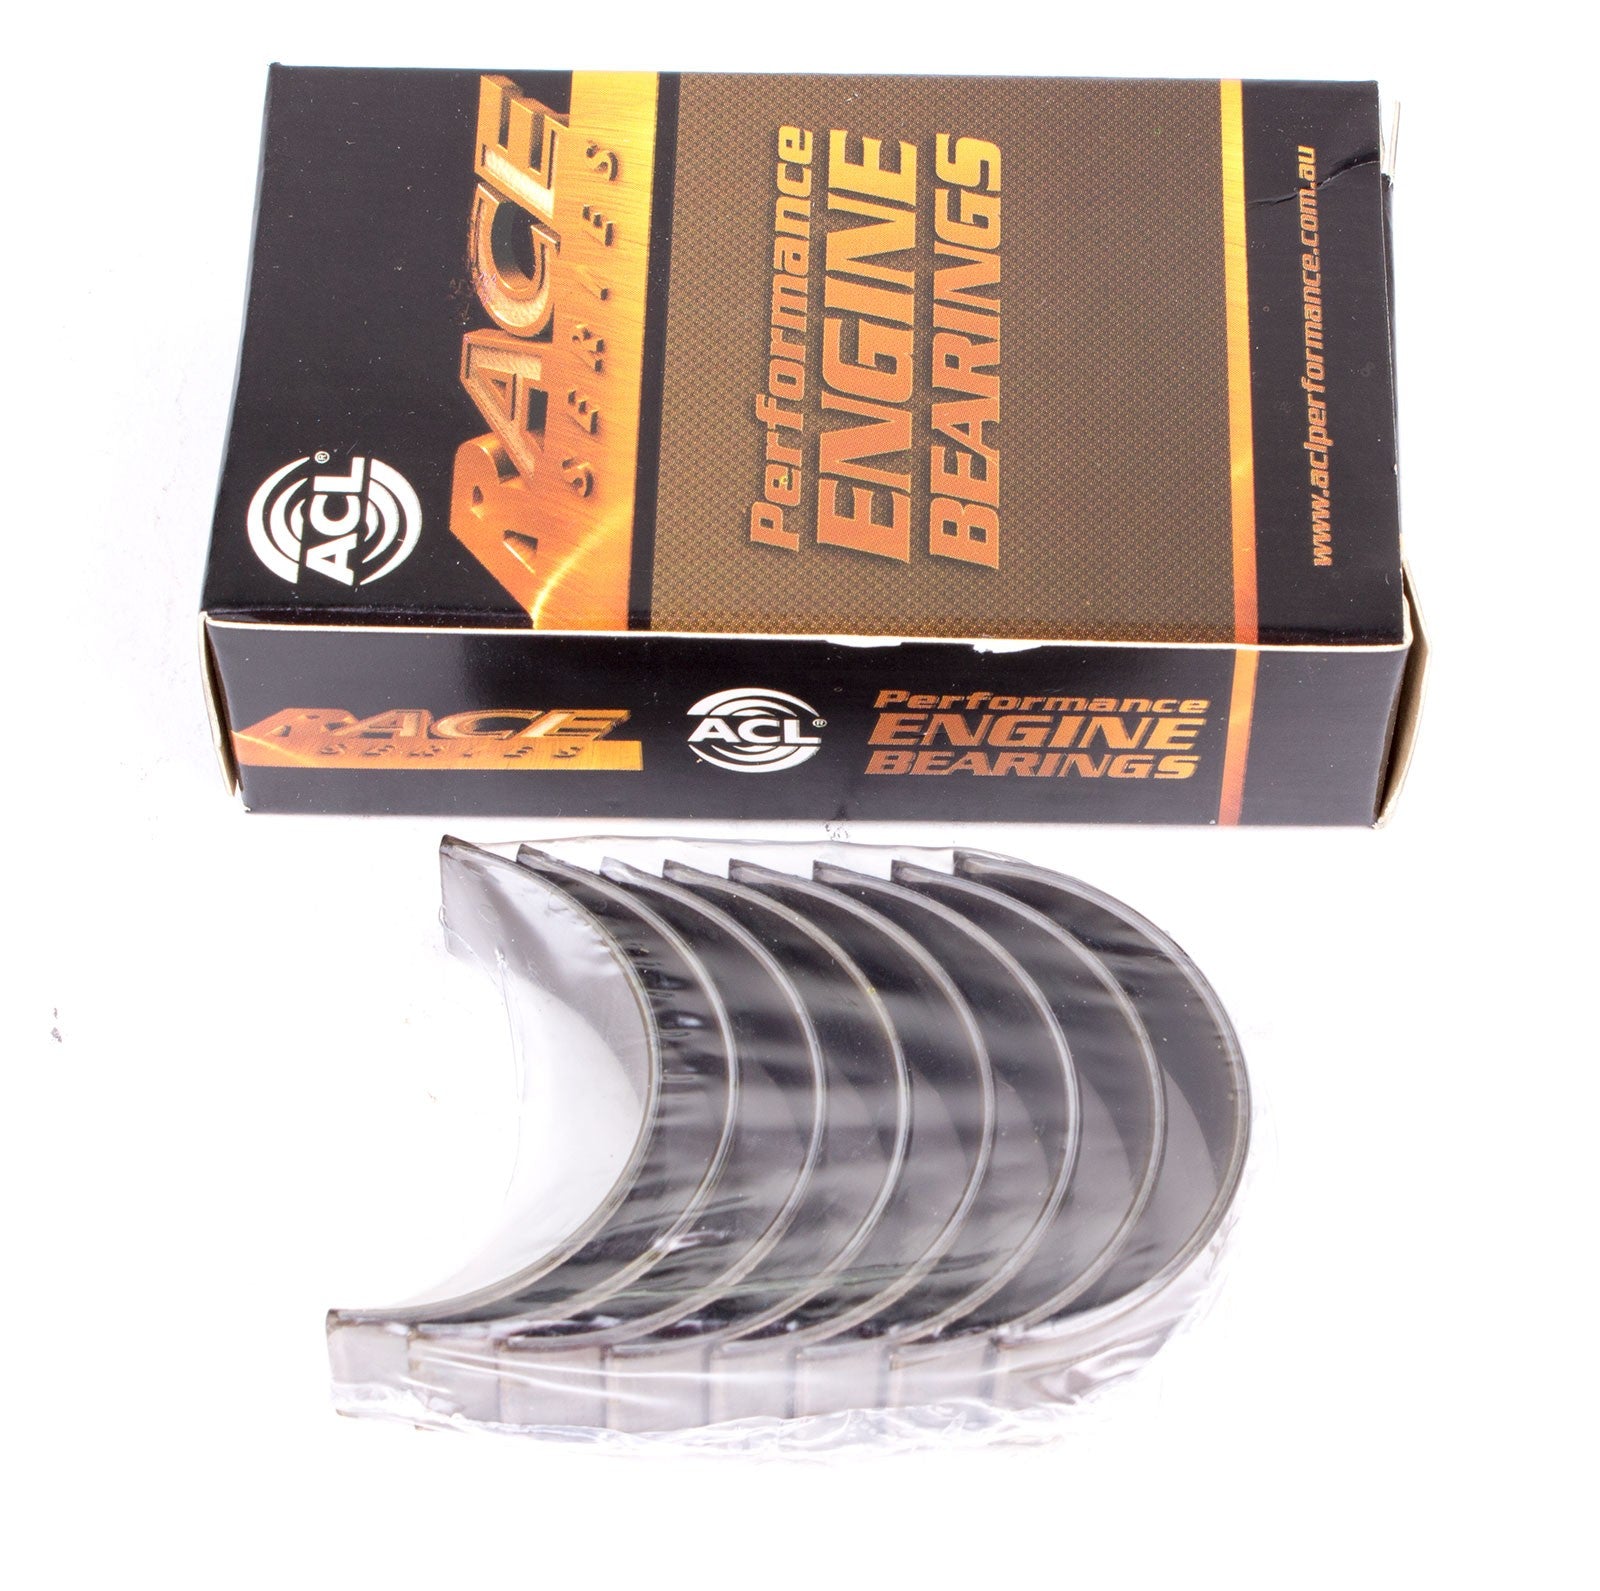 ACL 5M590H-20 Main bearing set (ACL Race Series) Photo-0 